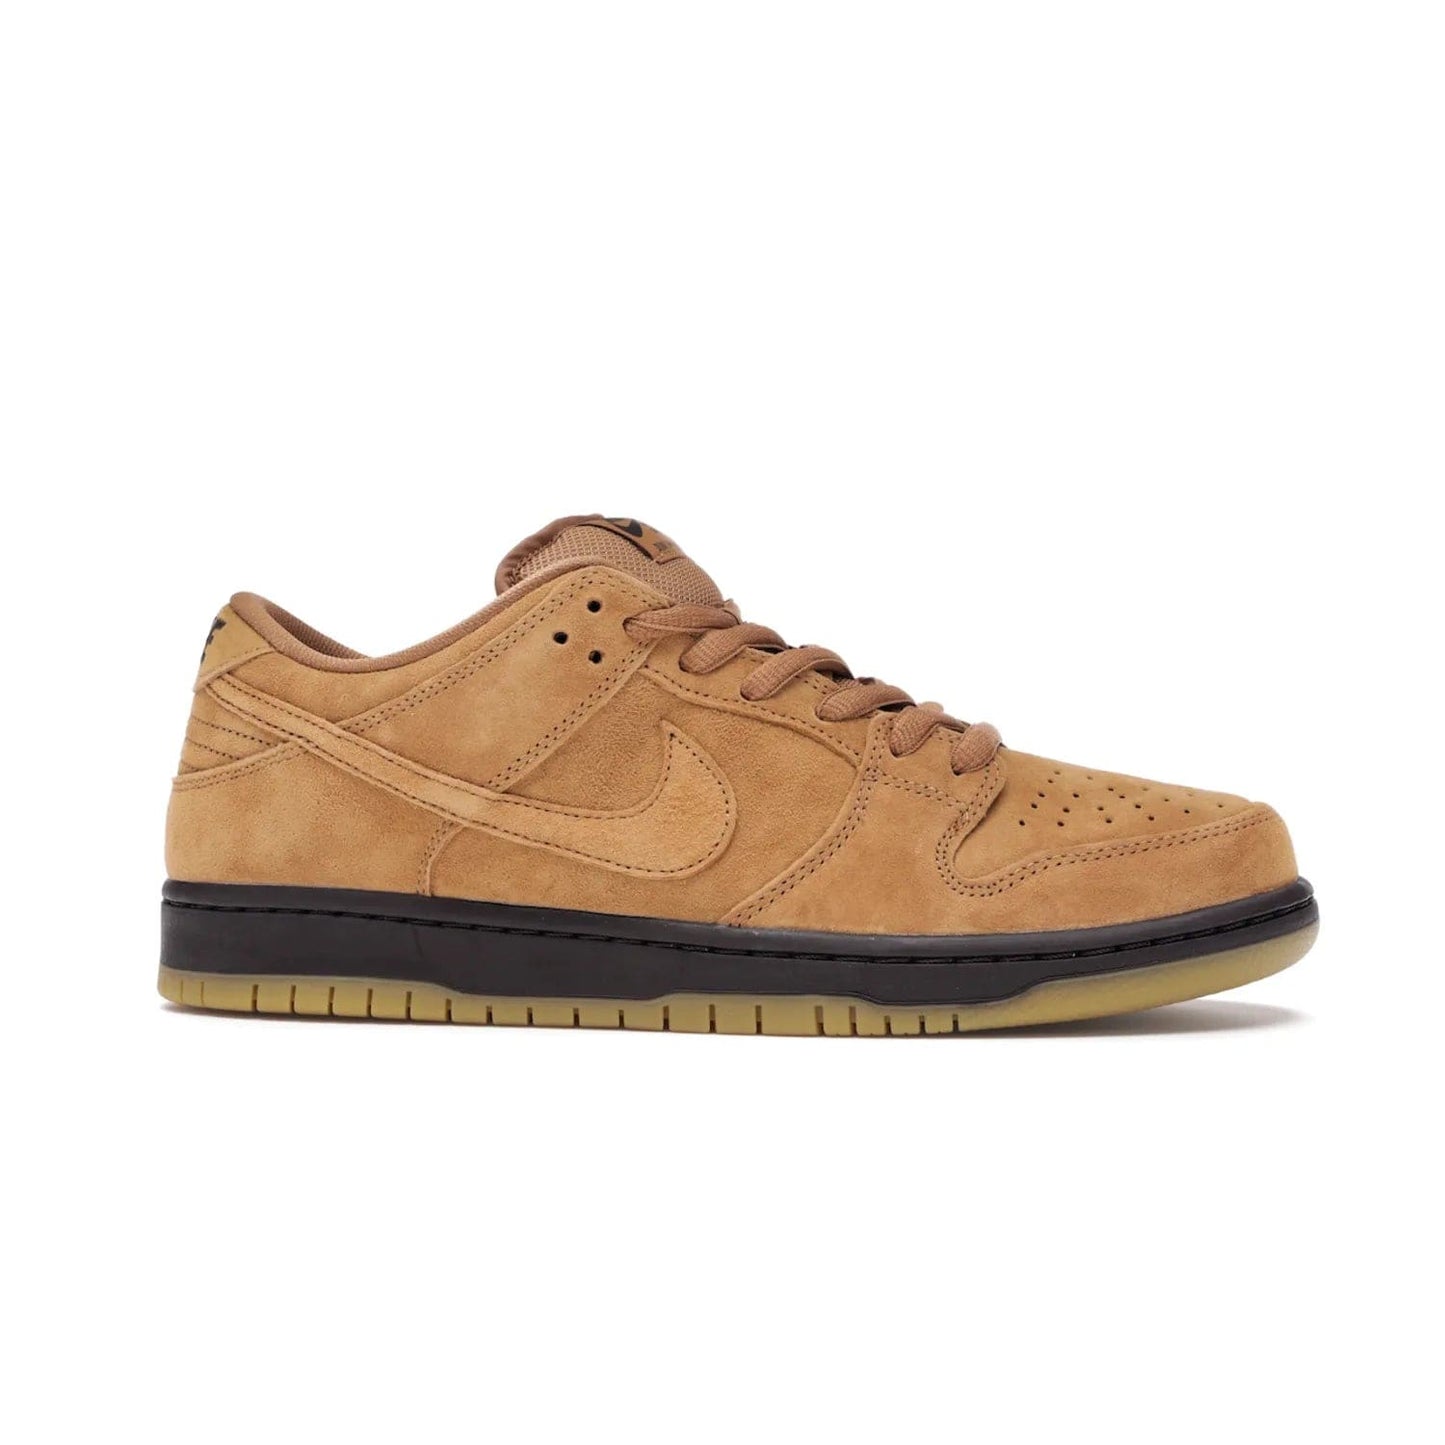 Nike SB Dunk Low Wheat (2021/2023) - Image 2 - Only at www.BallersClubKickz.com - The Nike SB Dunk Low Wheat (2021/2023)has a sleek silhouette and wheat suede upper. Tan tones for lining, mesh tongues, and laces. Iconic color palette midsole, perforated boxing toe. Brown branding on tongue and heel. Gum rubber outsole with partitioned pattern for traction. Eschewed in Feb 2021 for $110.